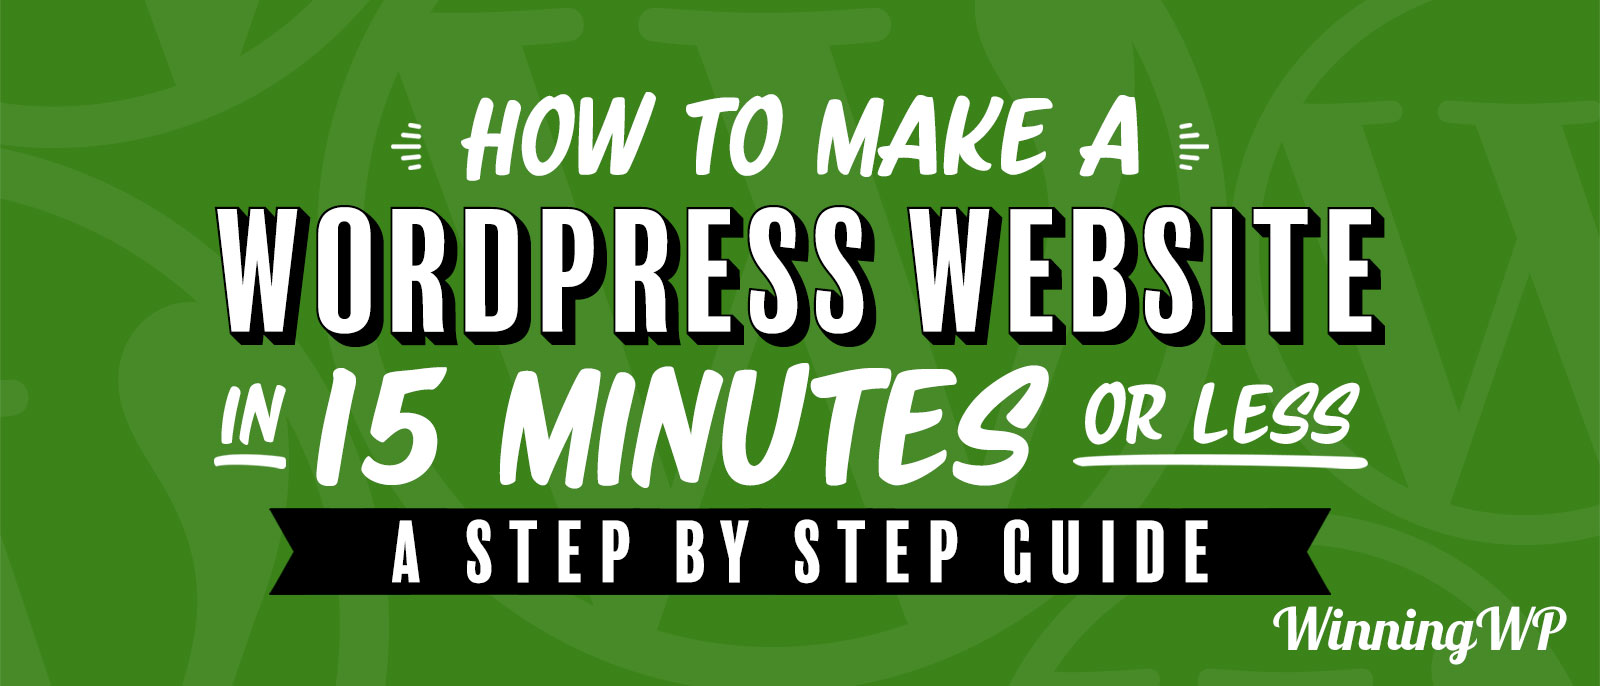 how-to-make-wordpress-website-in-15-minutes